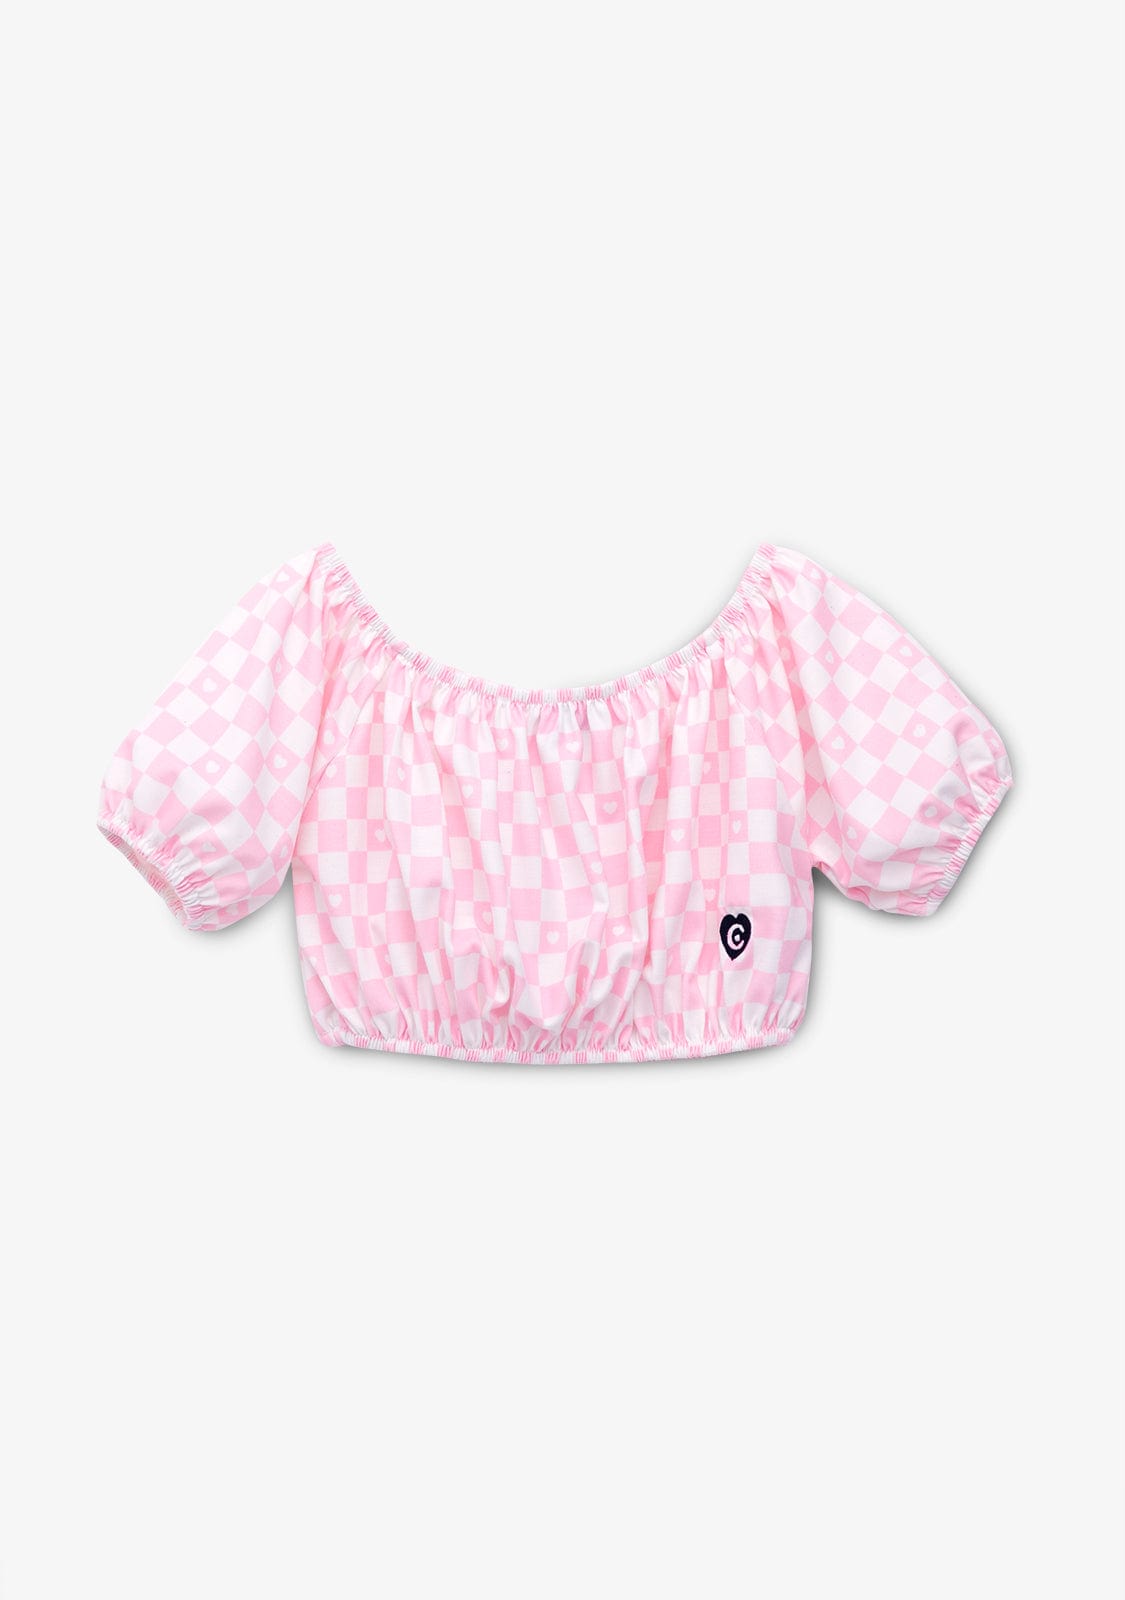 CONGUITOS TEXTIL Clothing Girl´s Pink Checkers Top